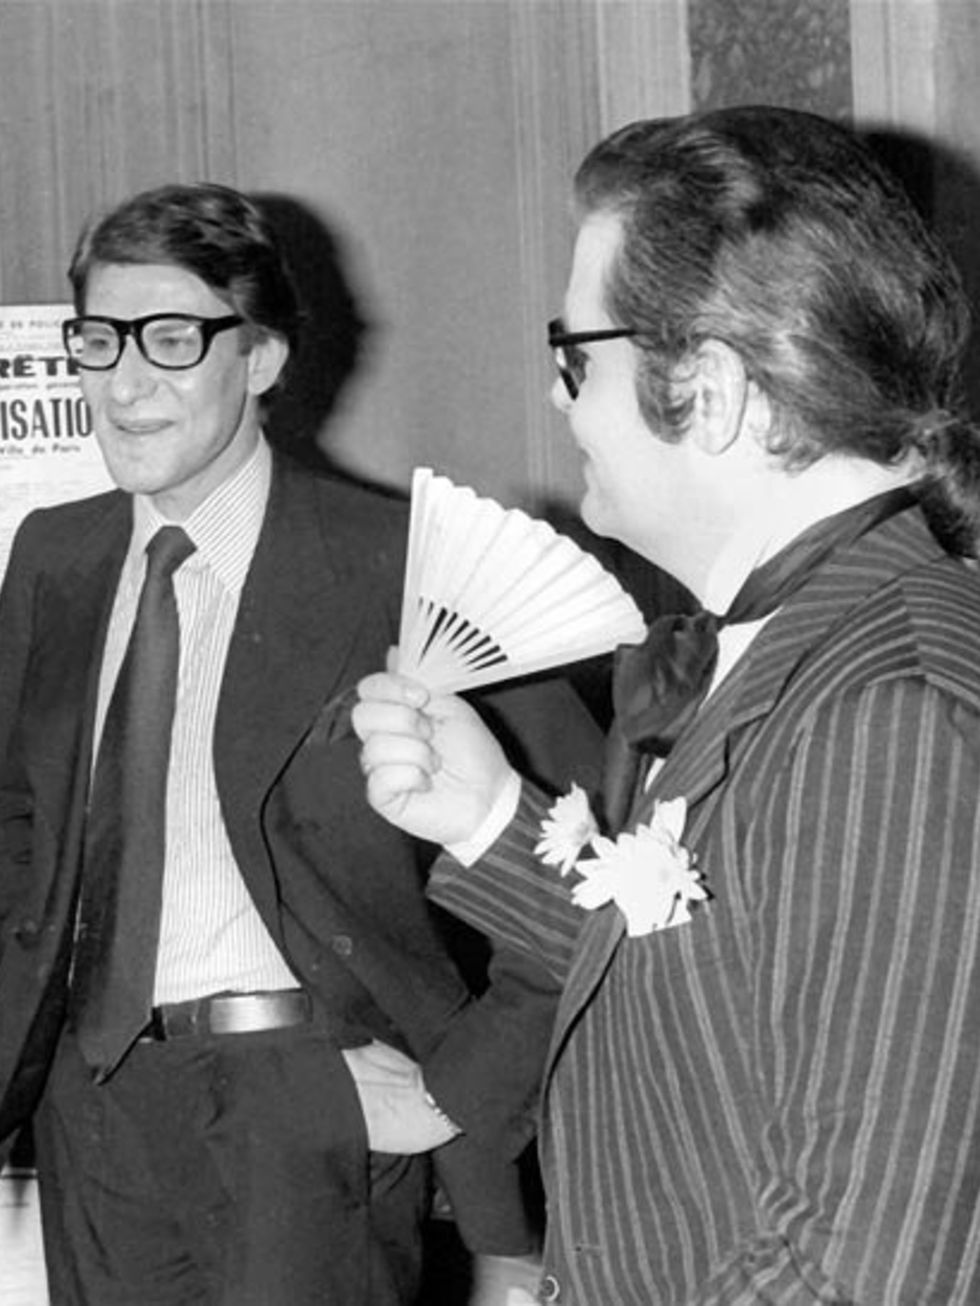 <p>An early-career photograph of Yves Saint Laurent and Karl Lagerfeld</p>